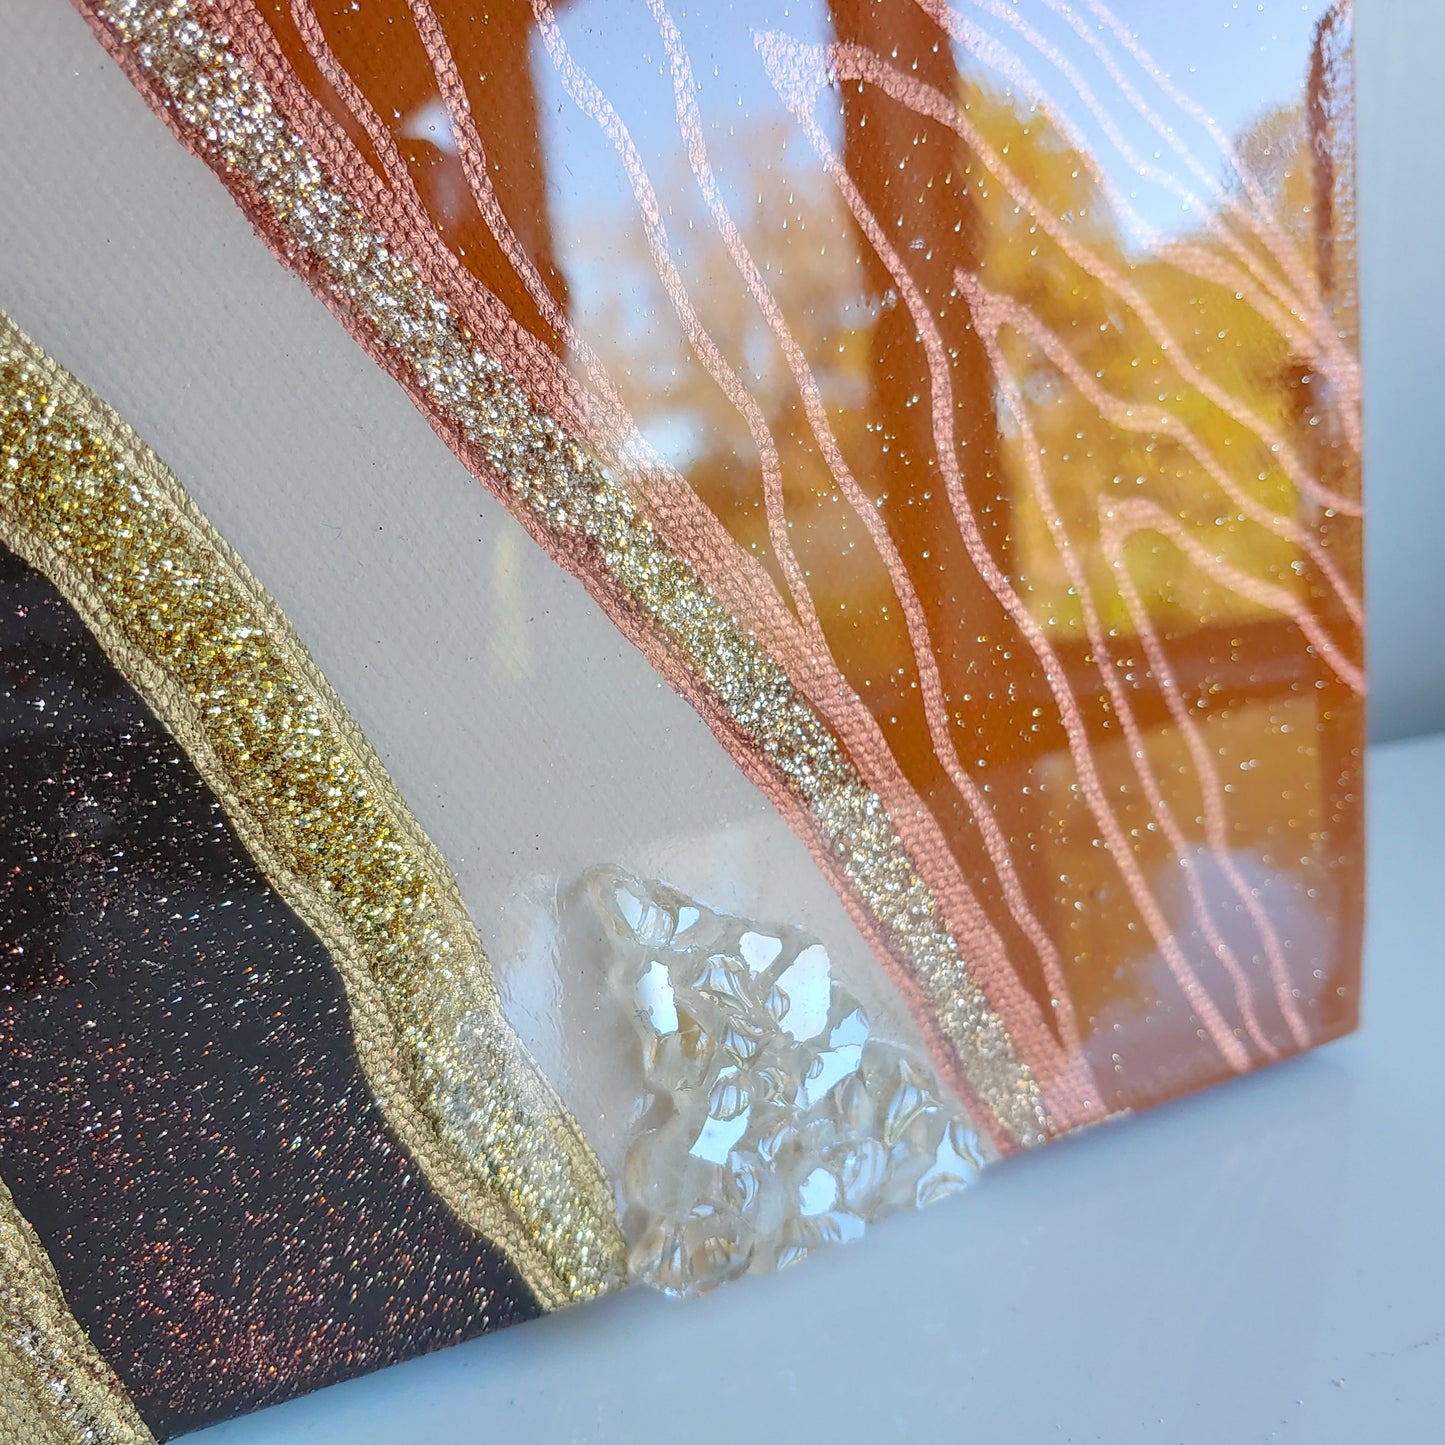 Caramel brown geode resin and glass diptych